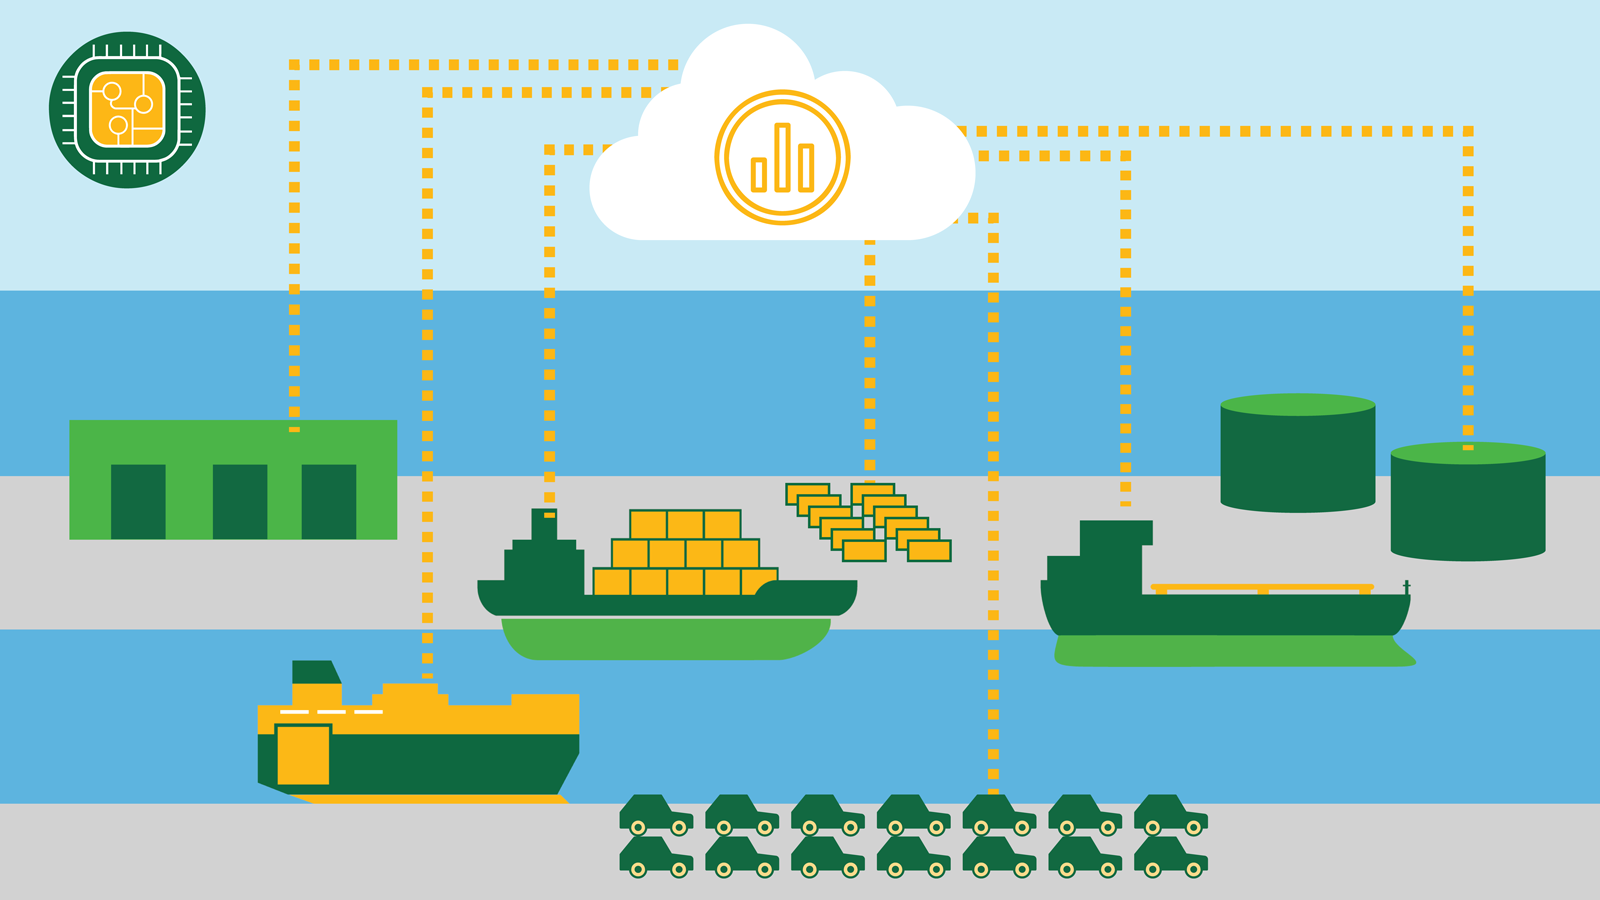 A graphic depicting interconnected shipping logistics, featuring ships, vehicles, storage tanks, warehouses, cloud storage, and a microchip communicating via dotted lines to illustrate advanced technology and seamless data flow.